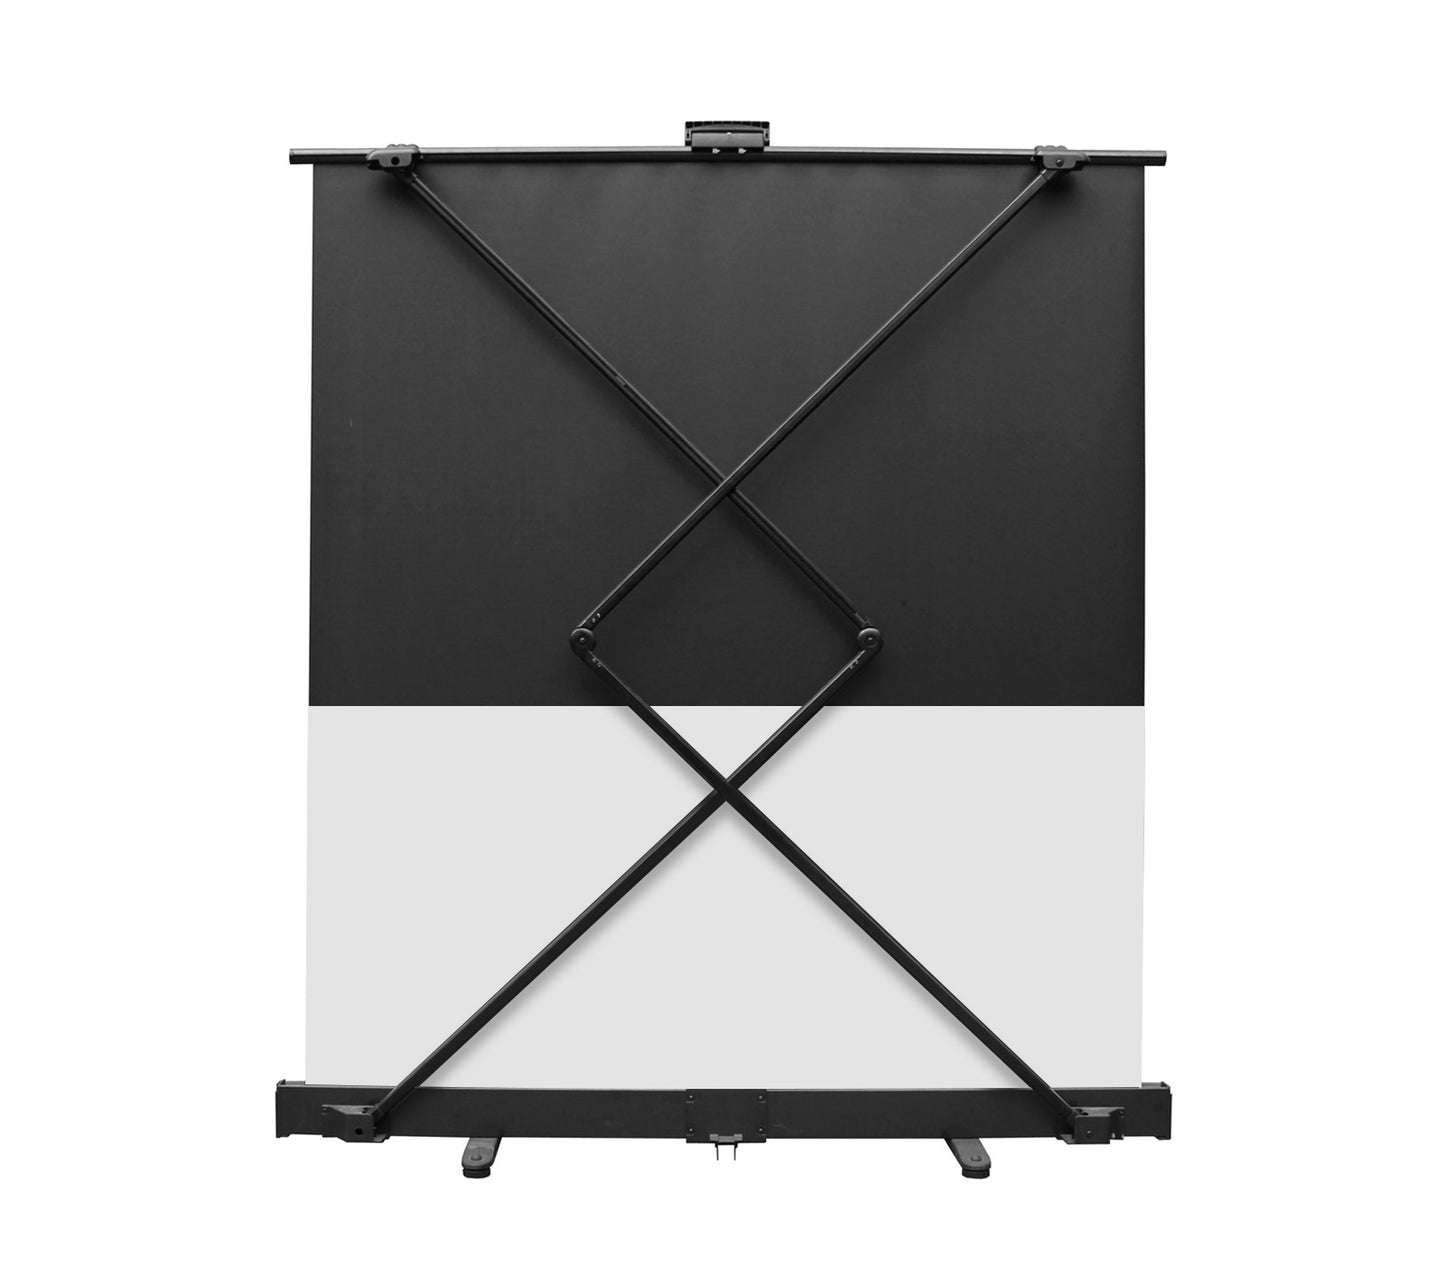 Sapphire Portable Pull-up Screen 4:3 Format Viewing Area 1630 x 1220  Approx Case Dimensions L 1930mm x H 83mm x D 61mm